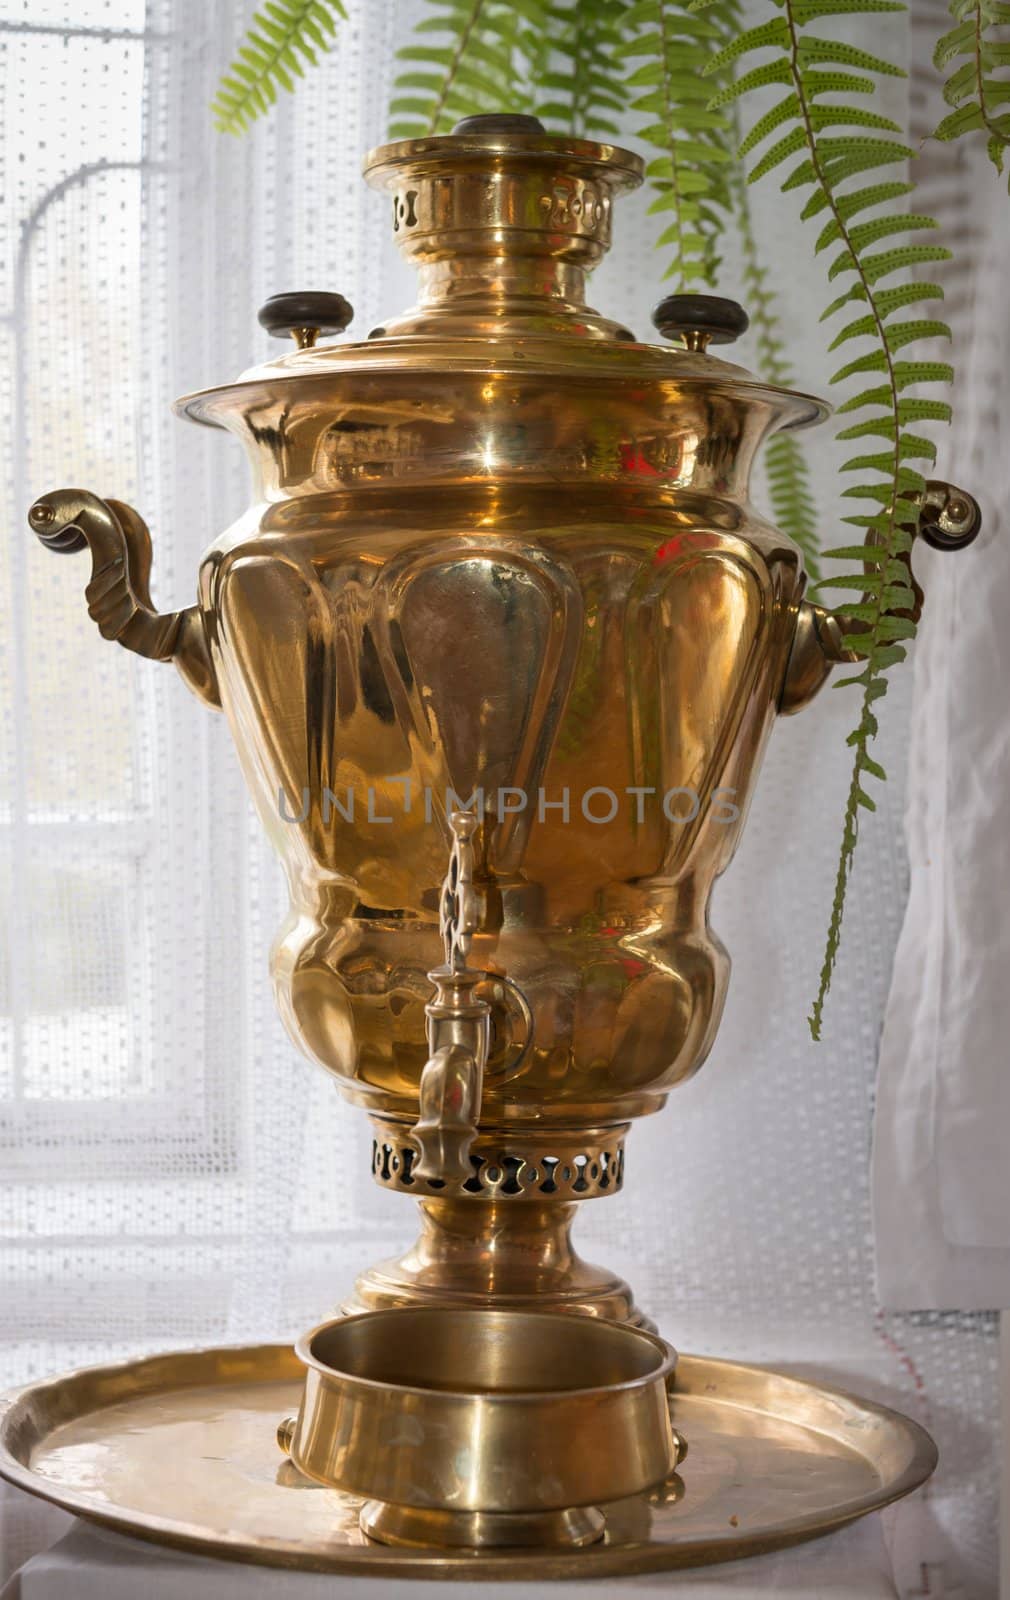 Traditional russian old samovar with selective focus on the body